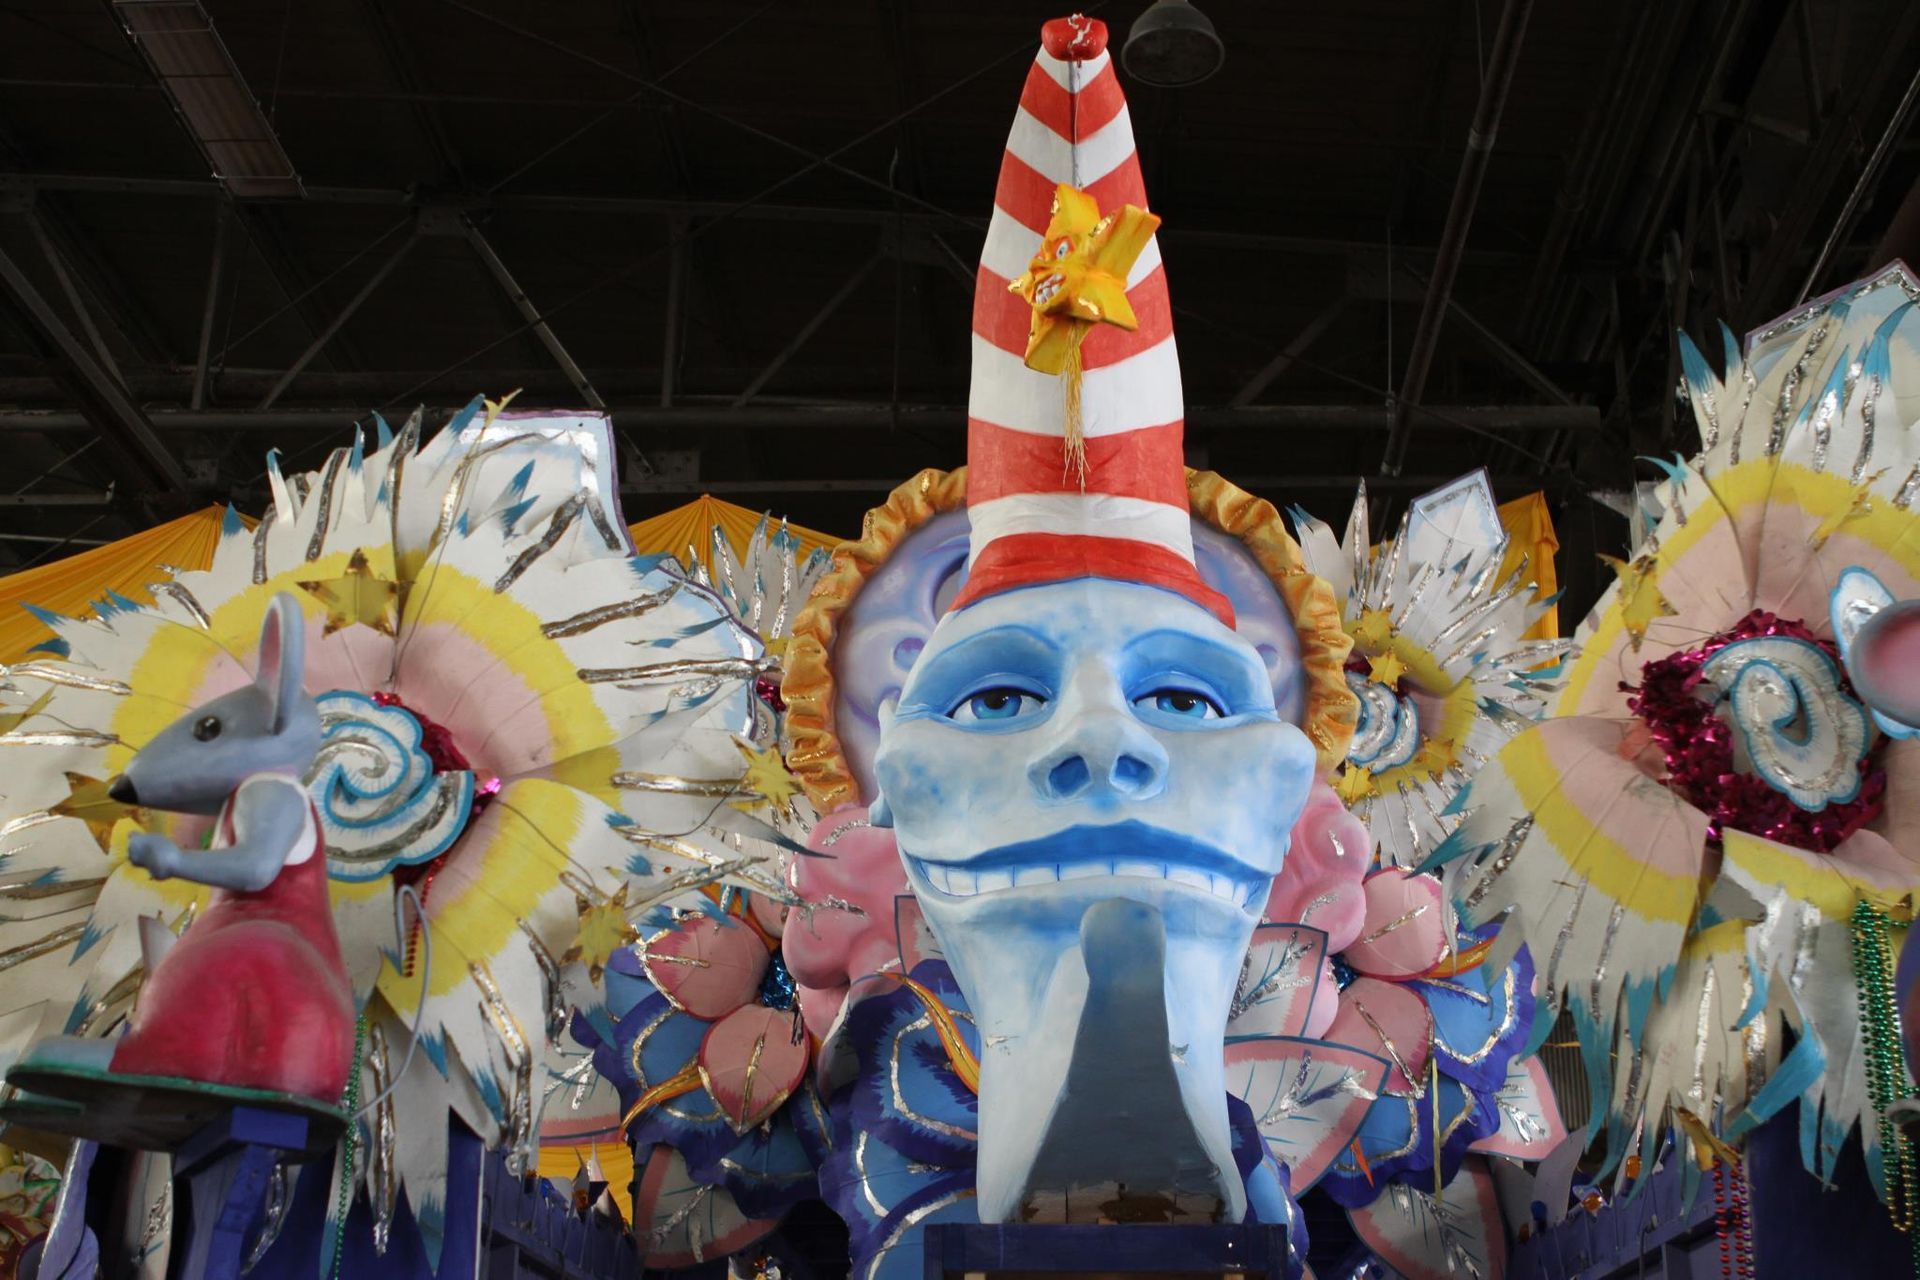  World's largest float designing and building facility: world record in New Orleans, Louisiana 